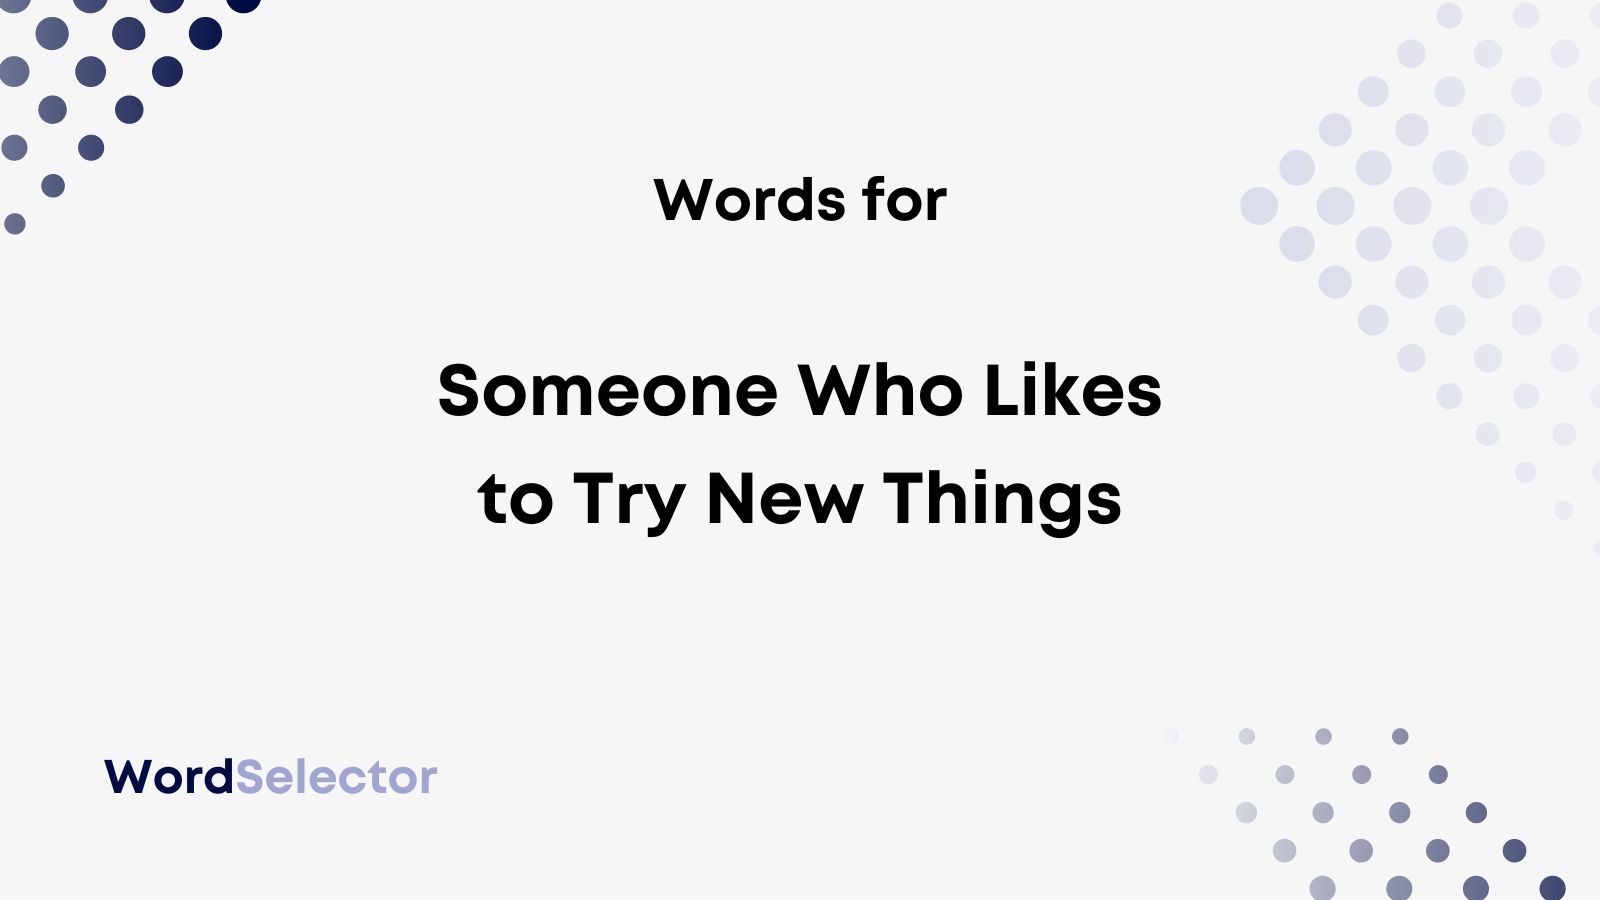 19-words-for-someone-who-likes-to-try-new-things-wordselector